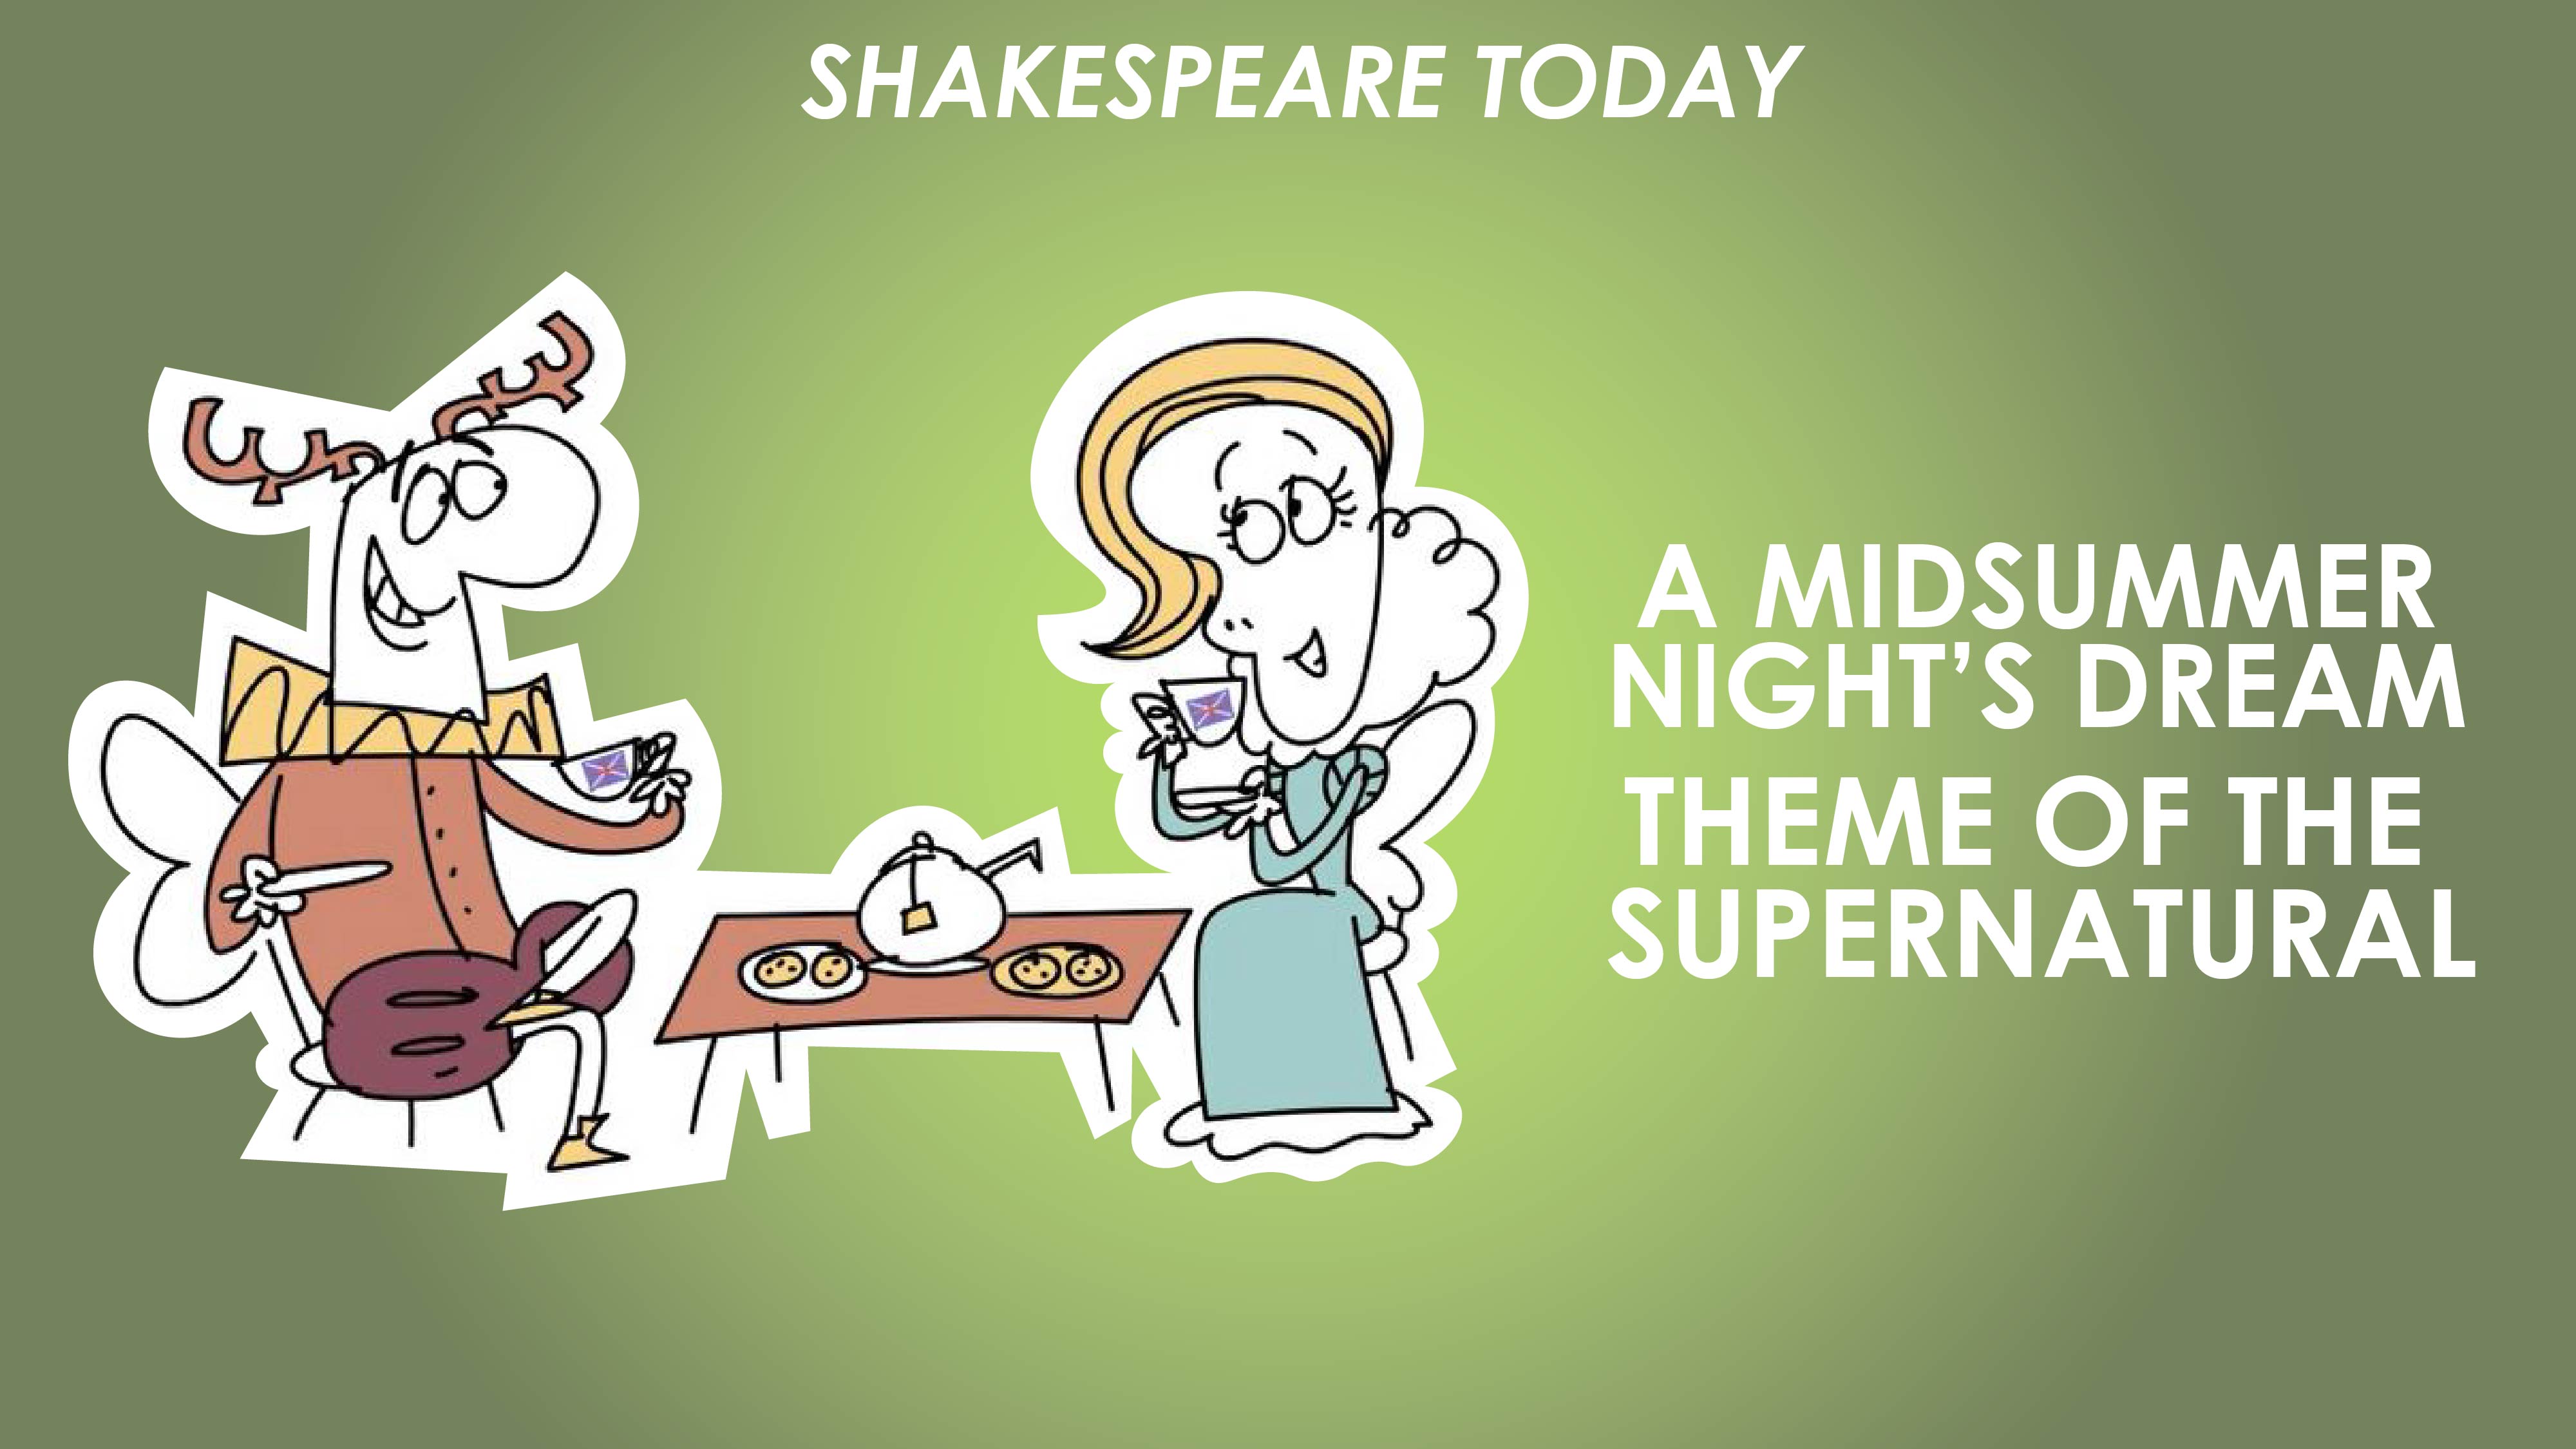 A Midsummer Night's Dream Theme of the Supernatural - Shakespeare Today Series